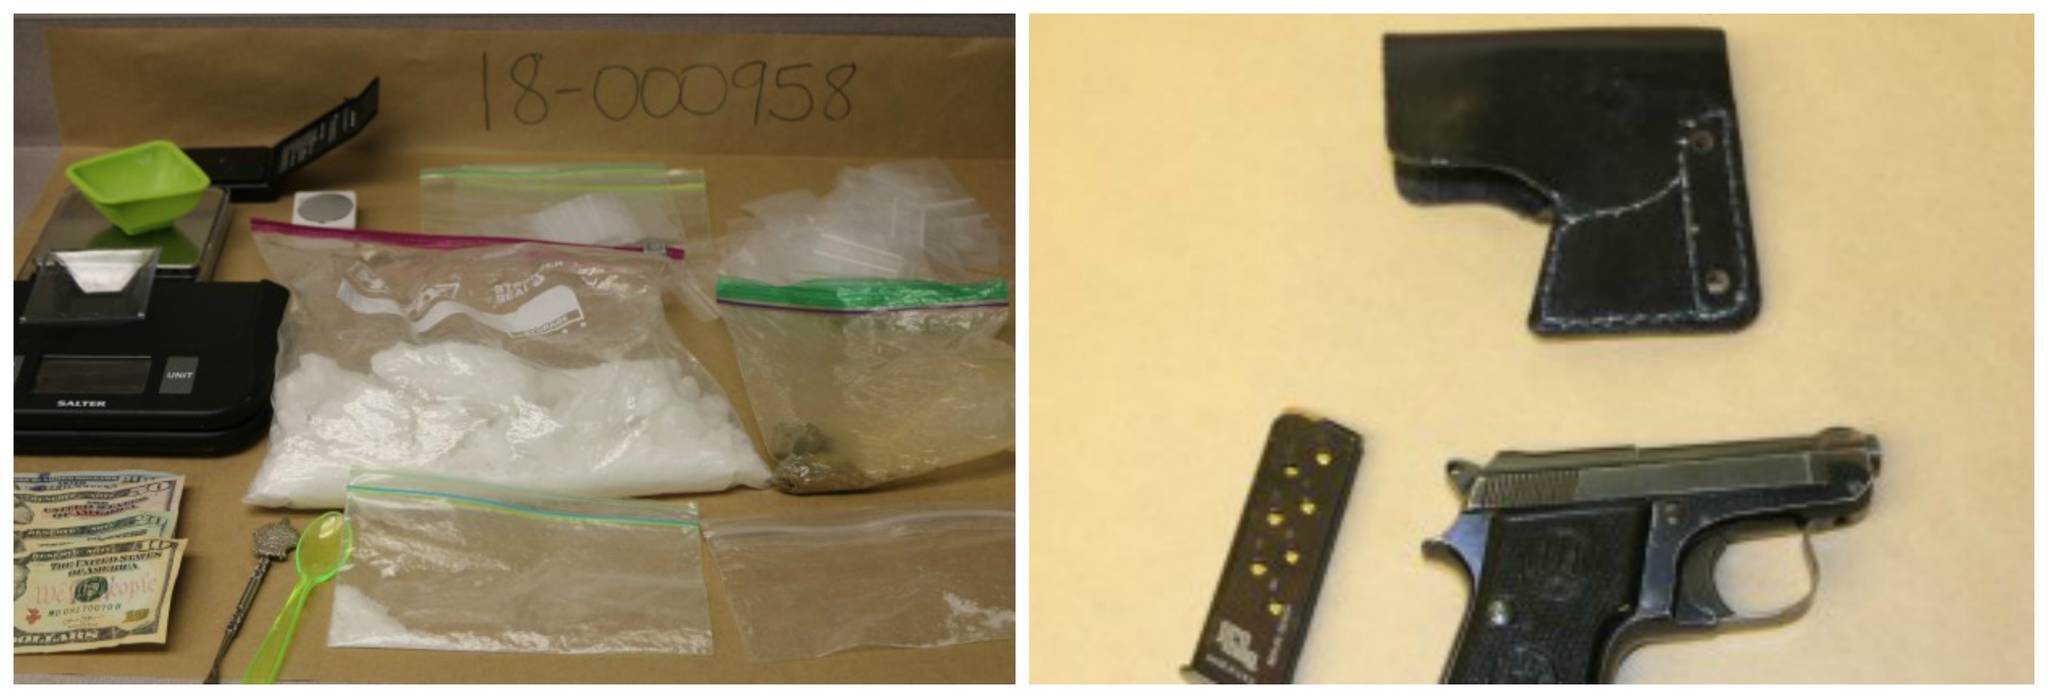 A search of the suspect’s residence yielded nearly a pound of meth, almost 20 grams of heroin and a large amount of cash. Police also found a loaded handgun in his vehicle. Courtesy of the Redmond Police Department